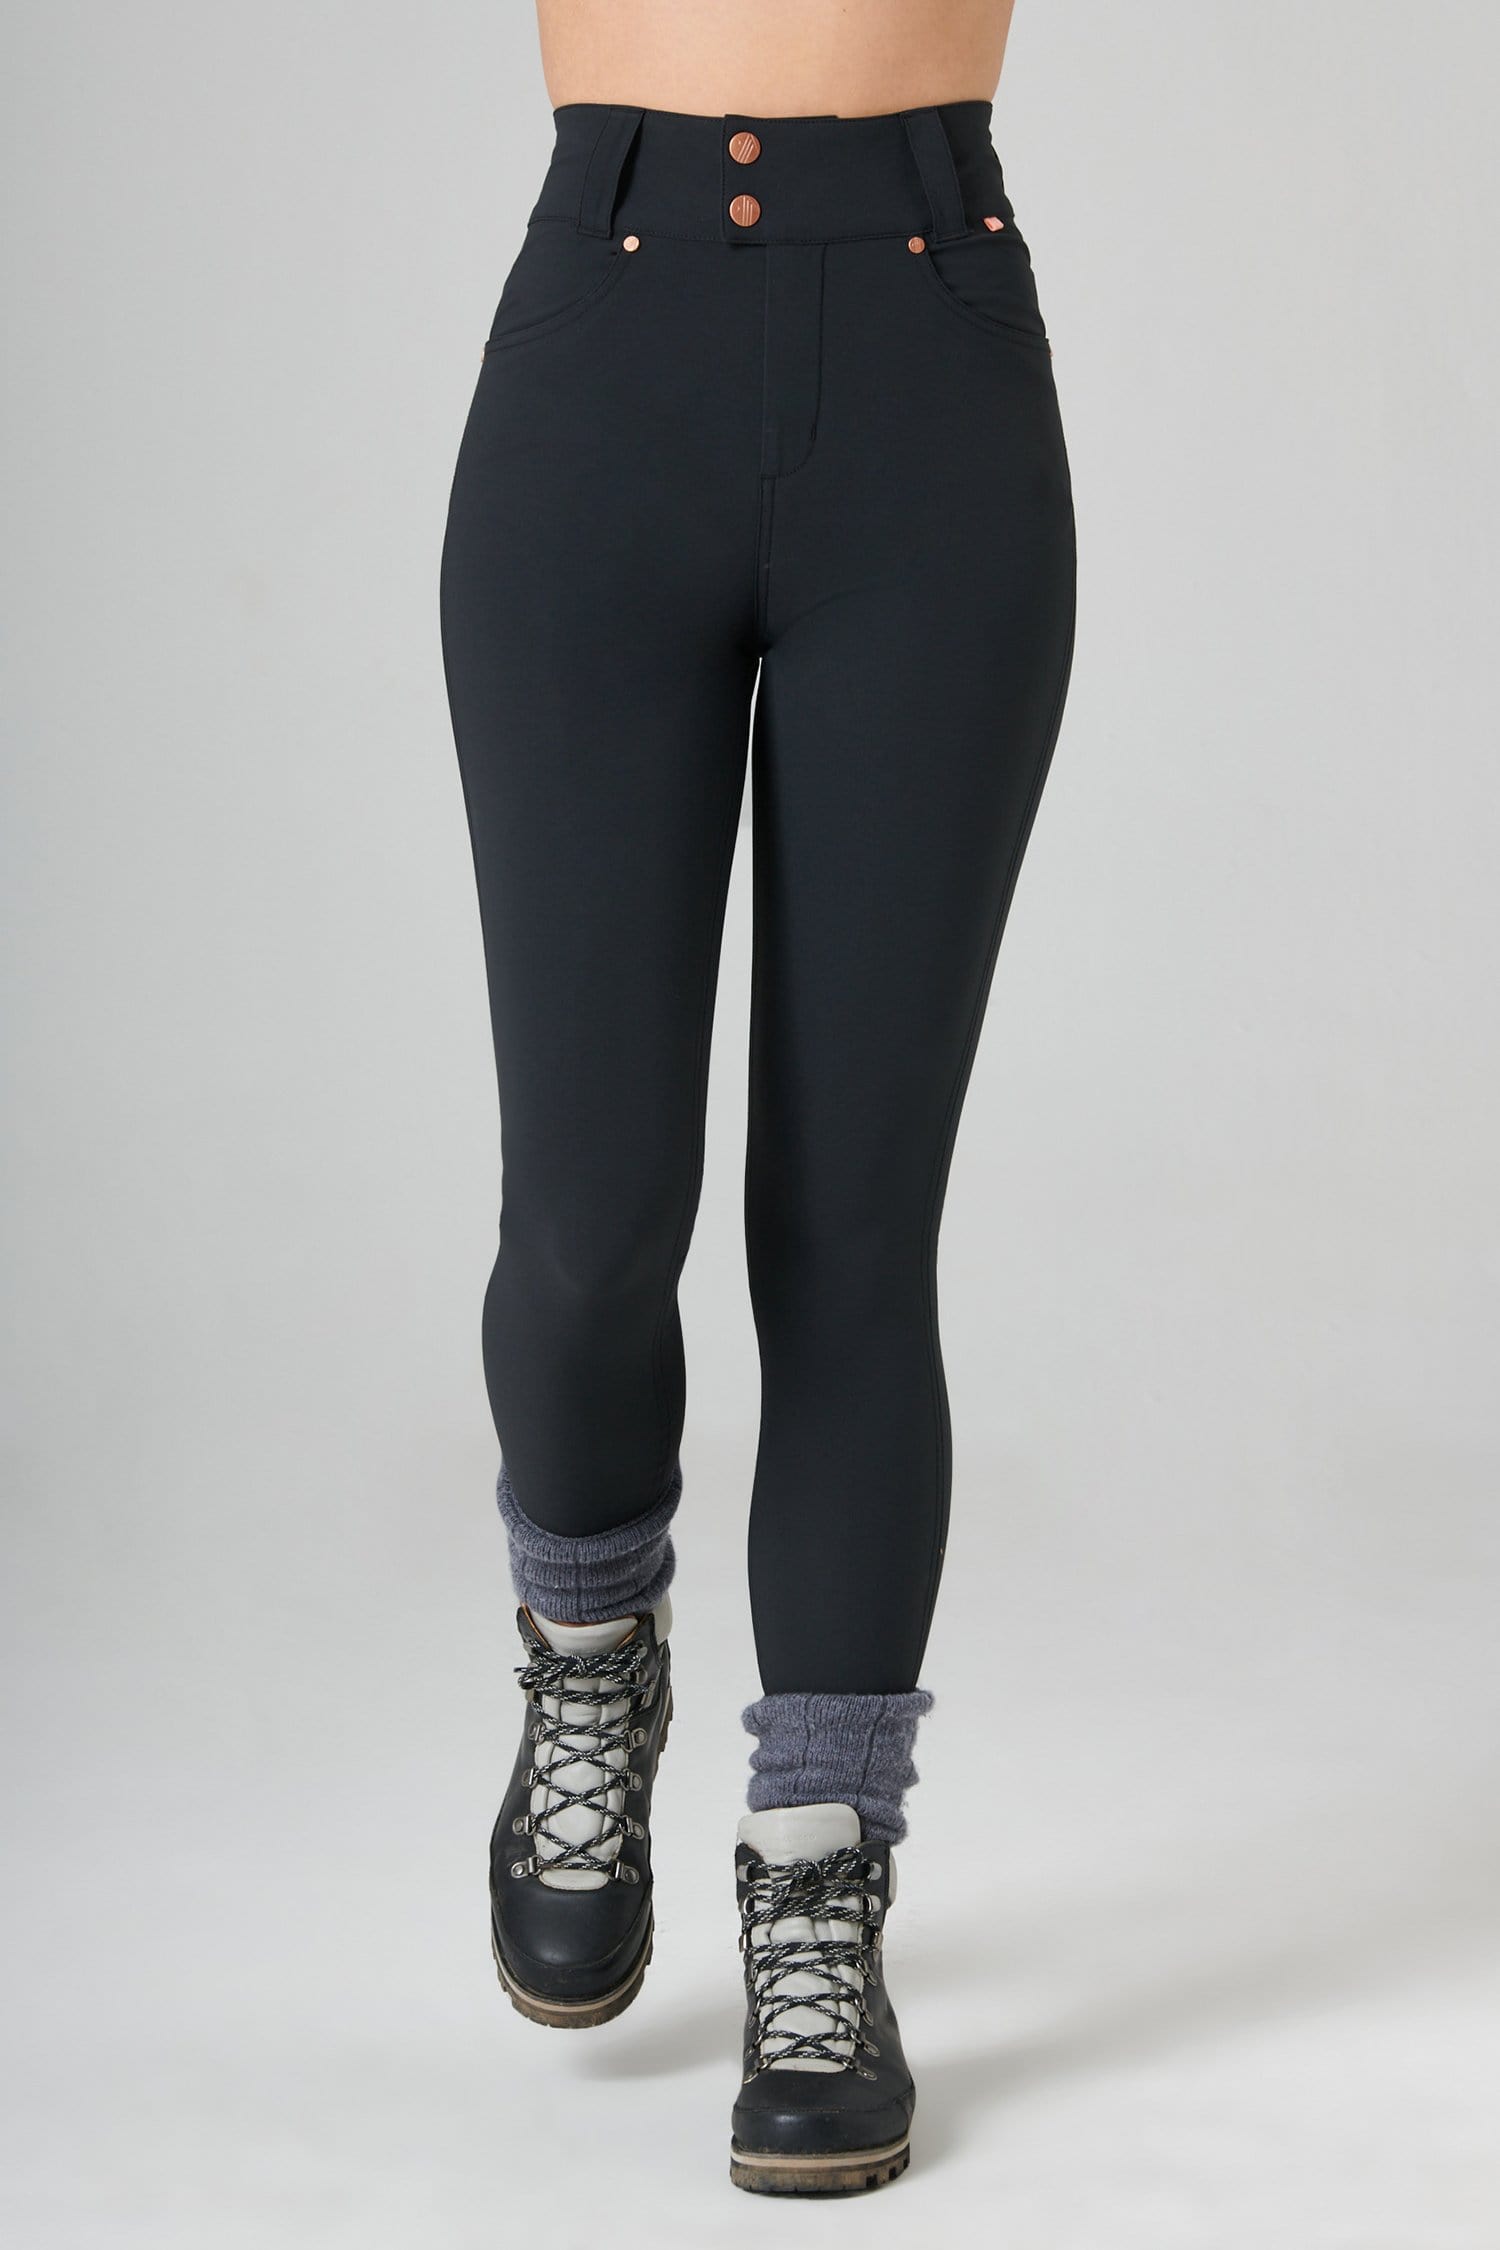 The Shape Skinny Outdoor Trousers - Black - 24r / Uk6 - Womens - Acai Outdoorwear